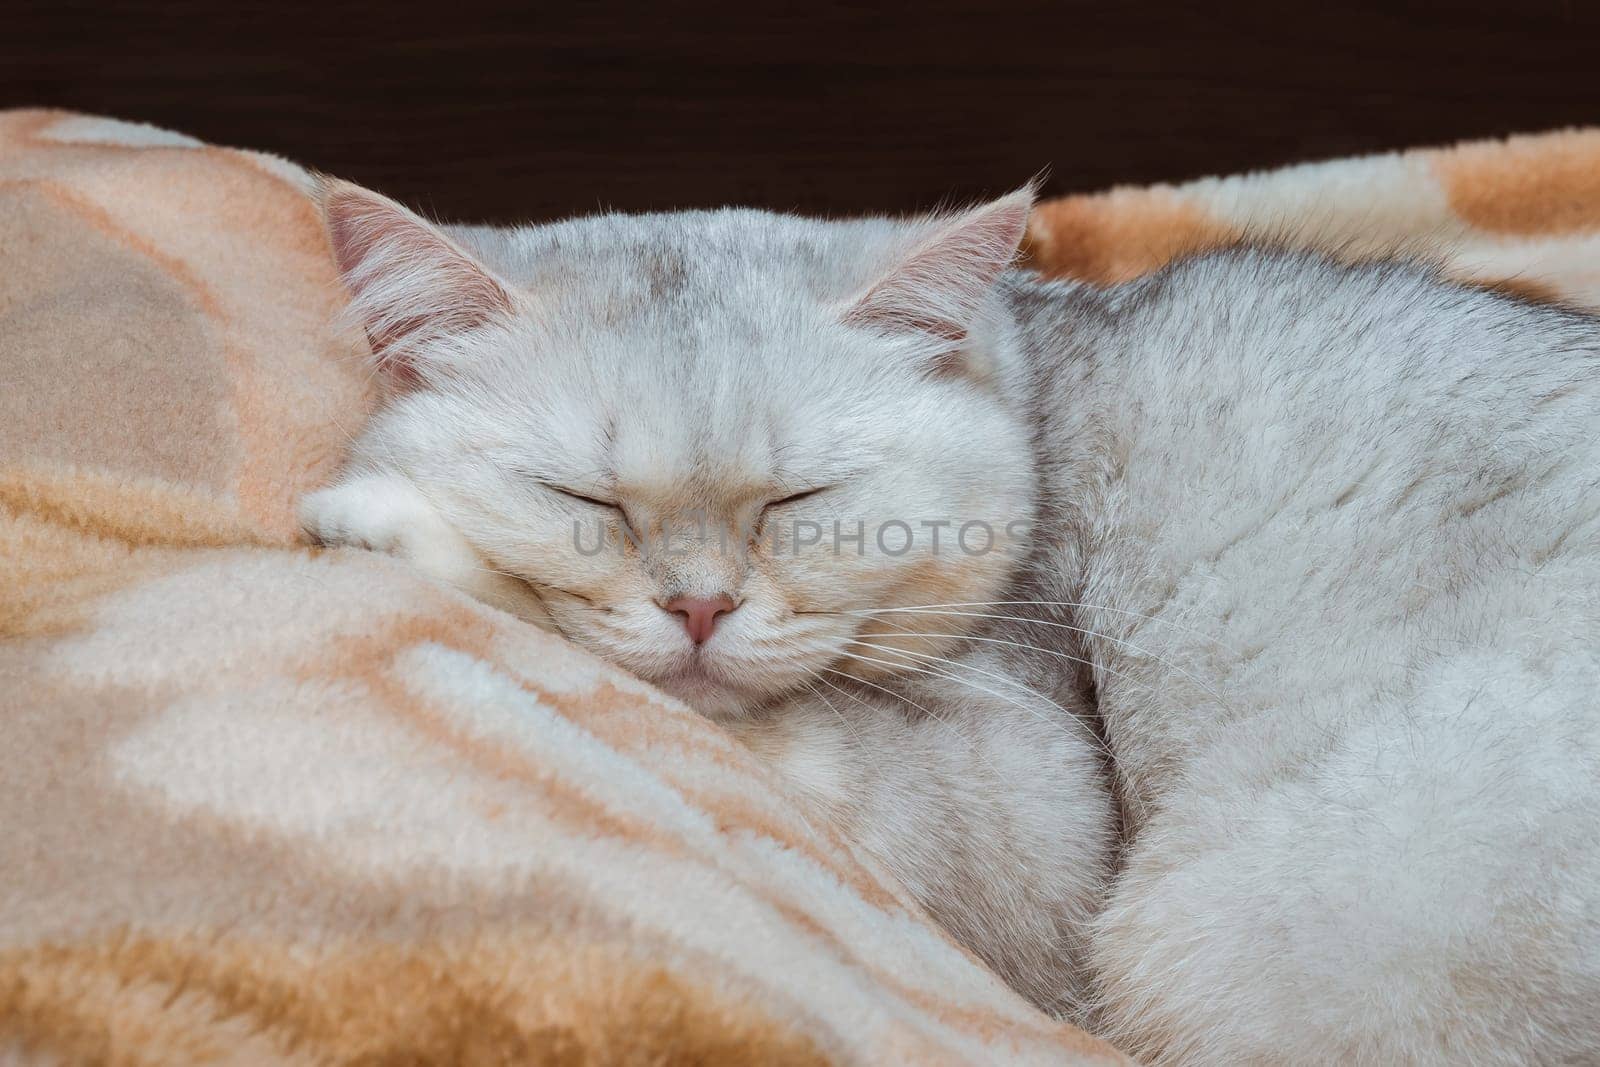 A silvery British breed cat is sleeping in close-up on a bed with its head on a pillow. Pets at home by ElenaNEL